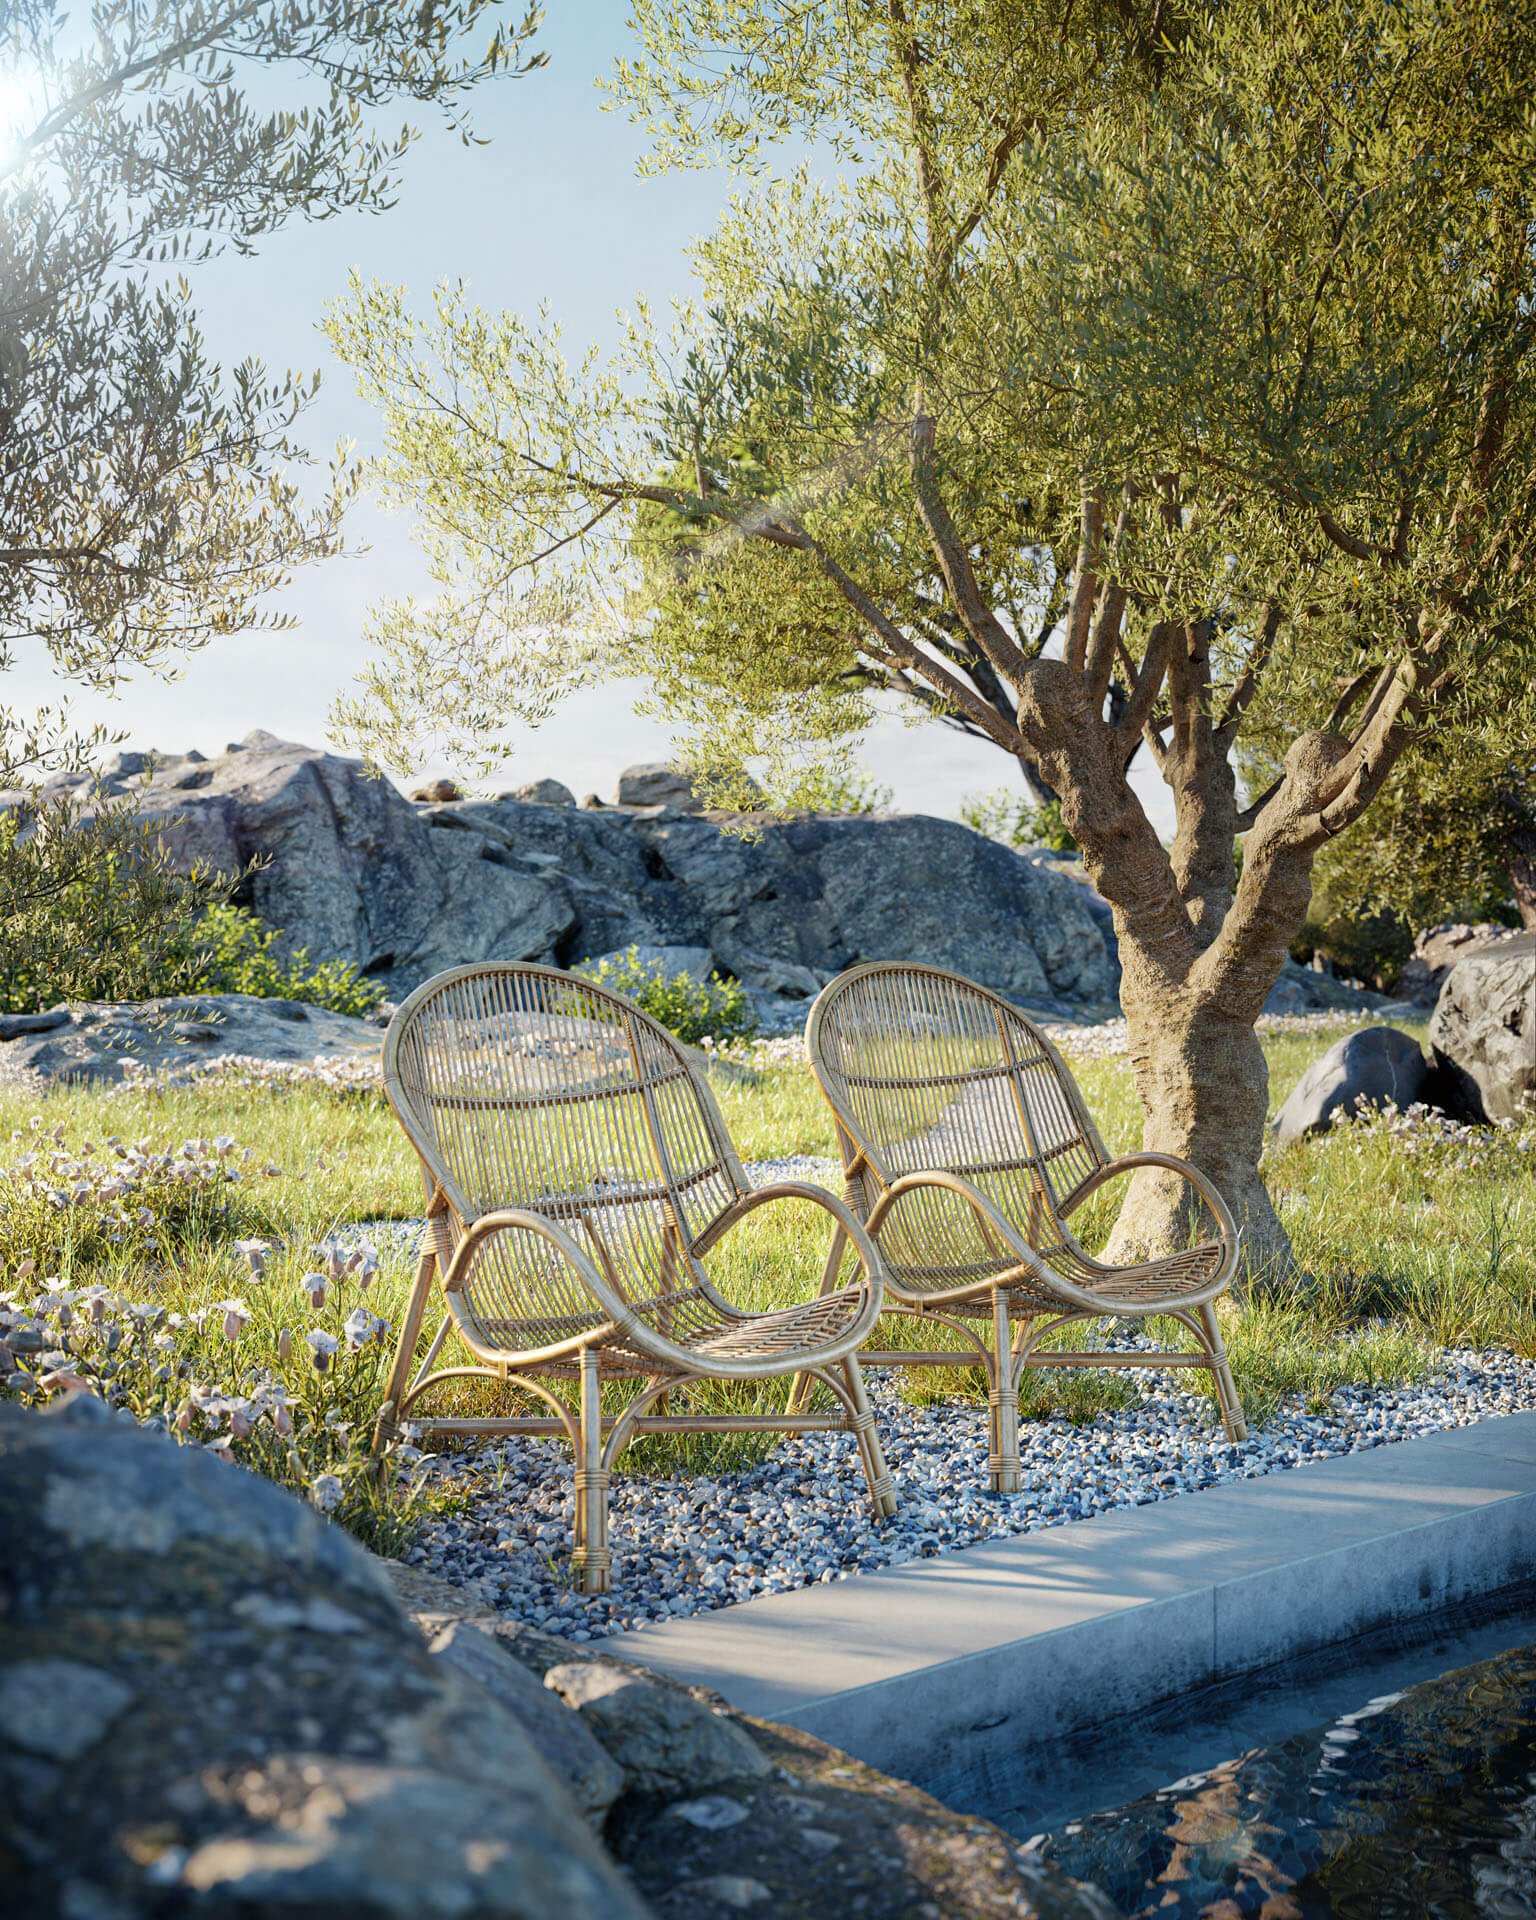 Wicker Chairs 3D Rendering in a Spring Setting